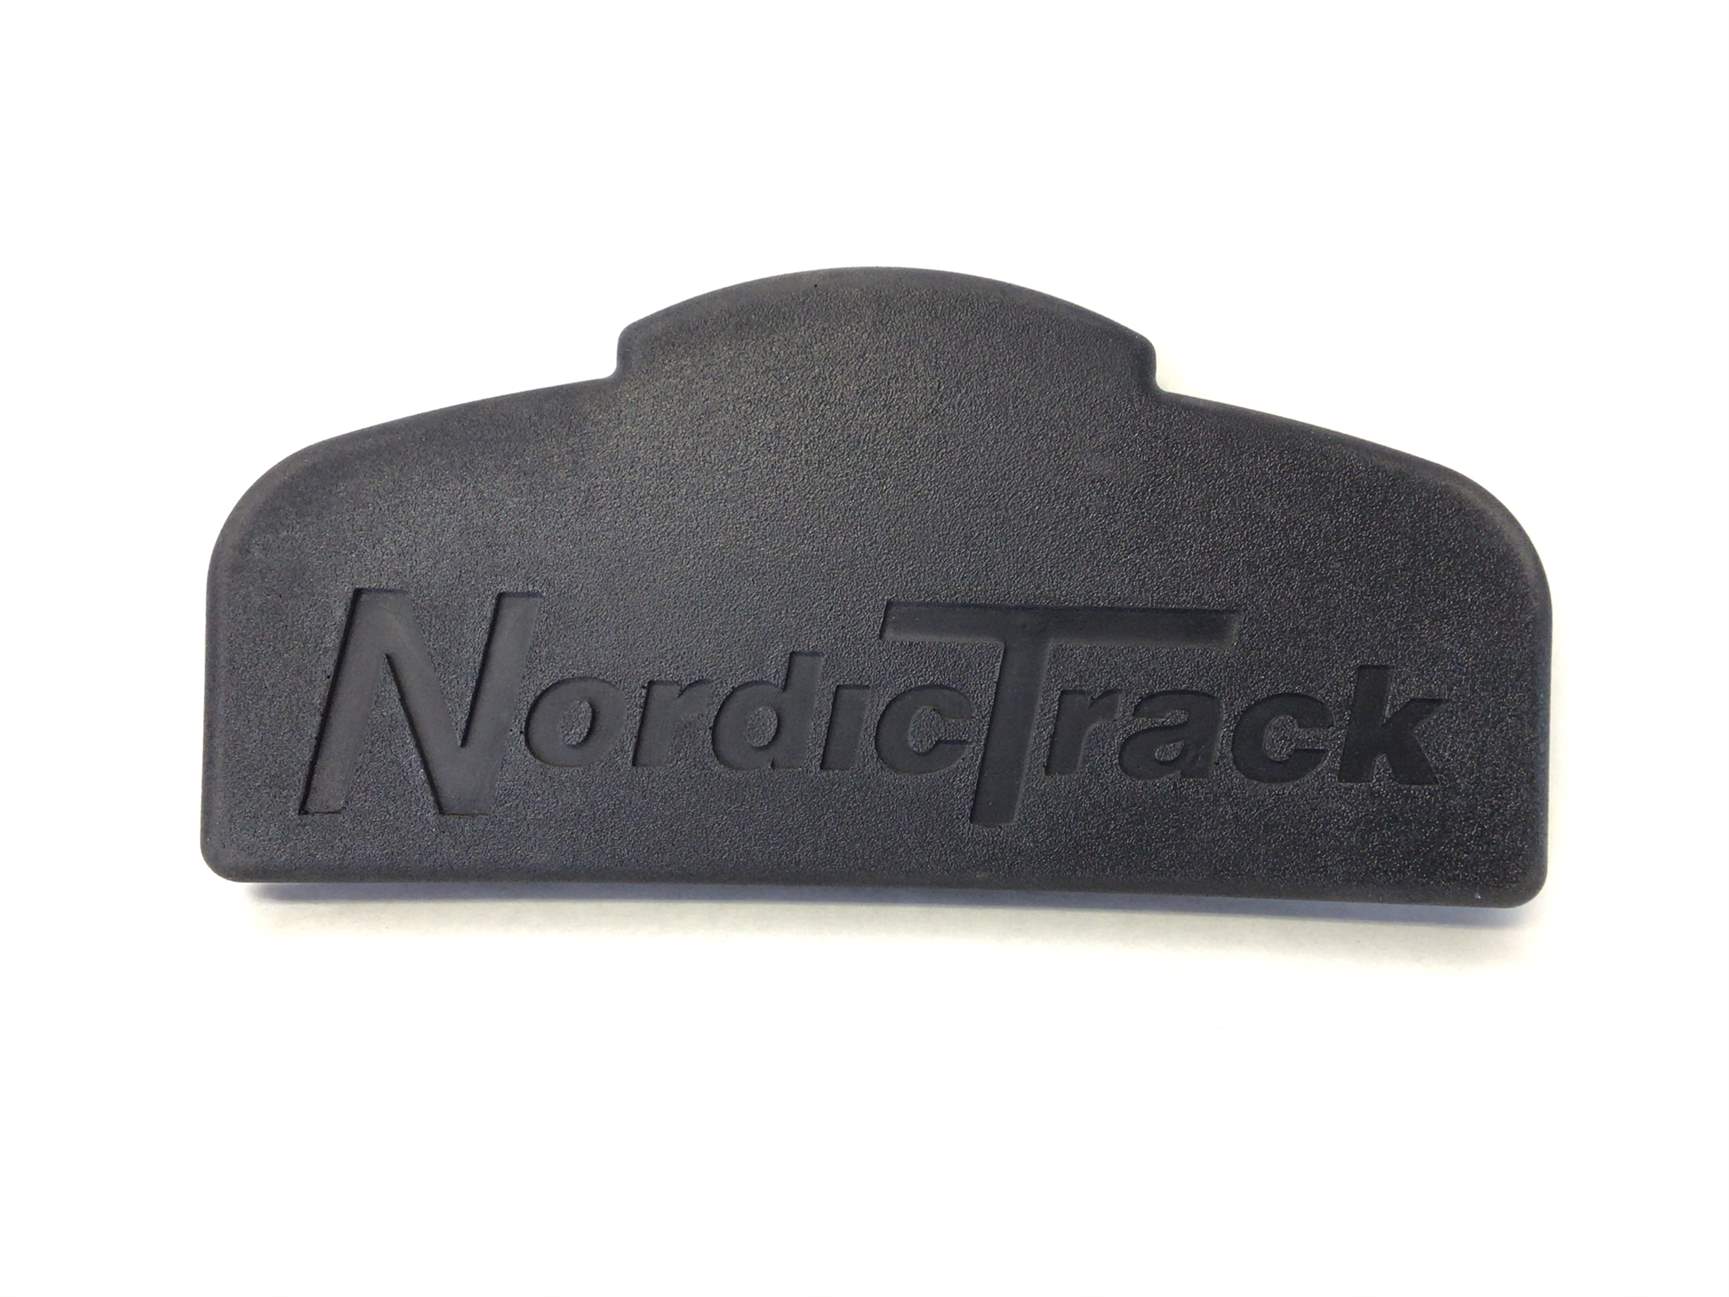 Hip Pad w Nordictrack Ensignia (Used)